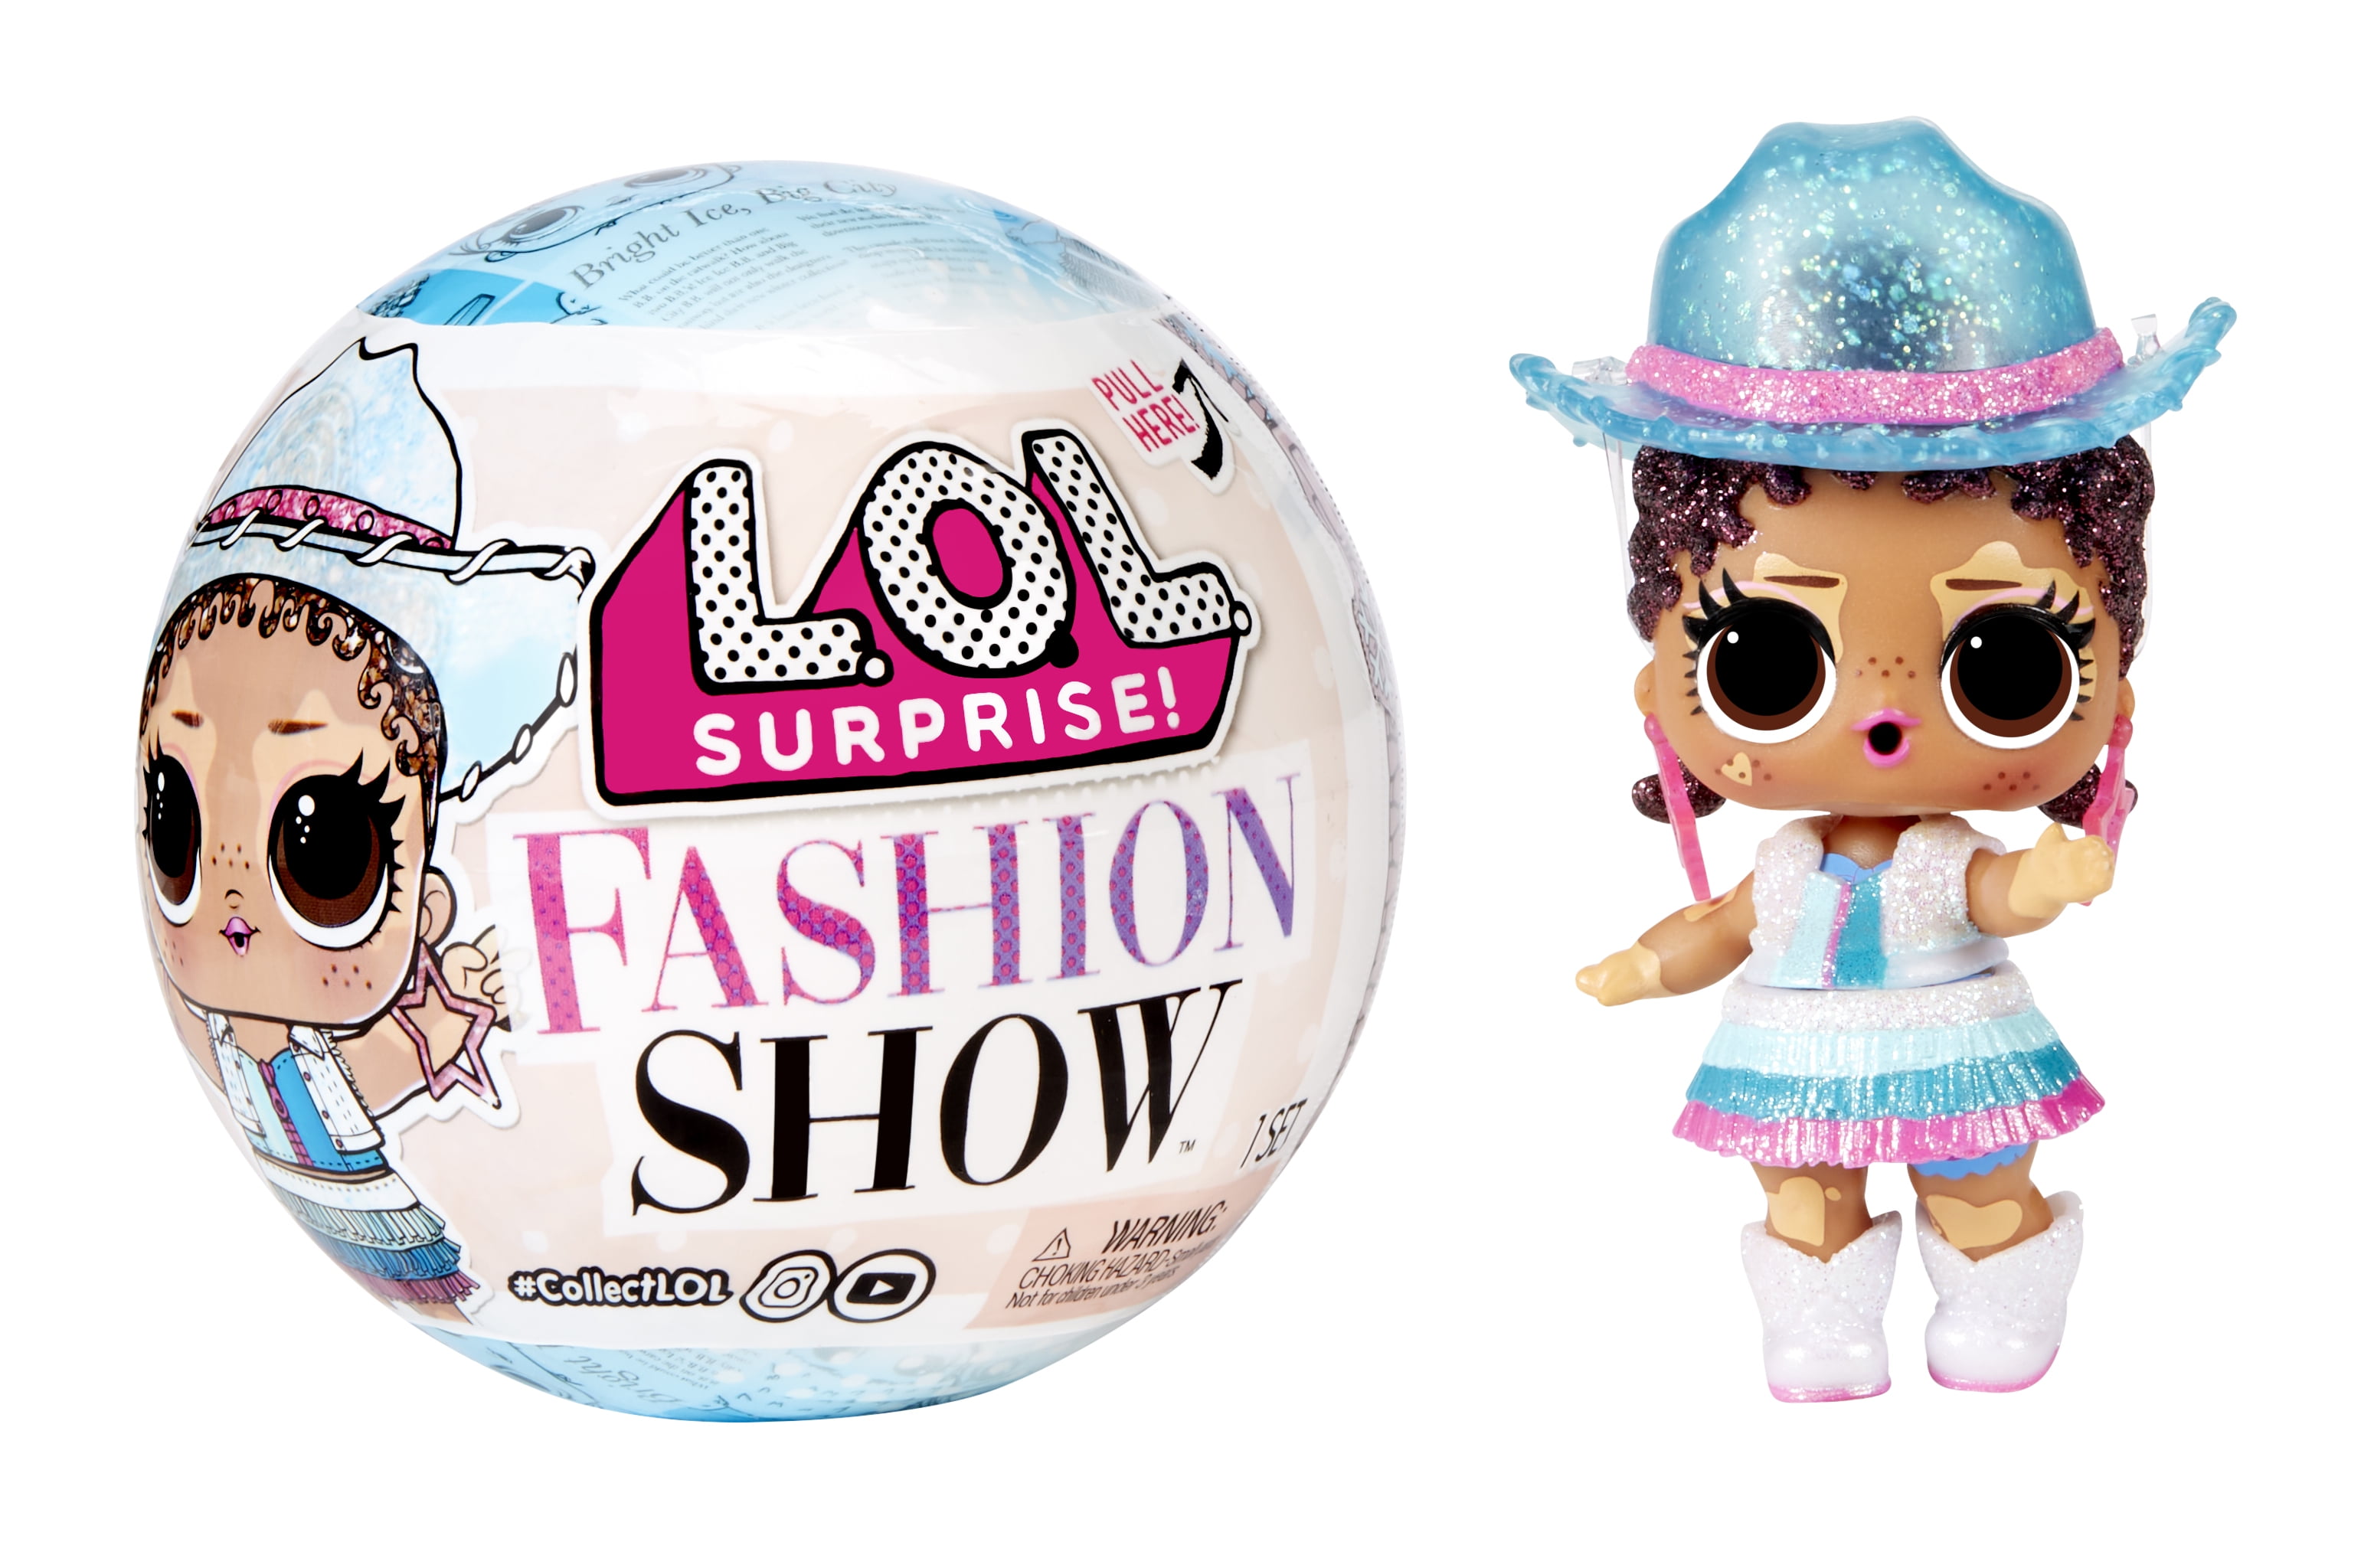 . Surprise Fashion Show Dolls in Paper Ball with 8 Surprises,  Accessories, Collectible Doll, Paper Packaging, Fashion Theme , Fashion Toy  Girls Ages 4 and up 